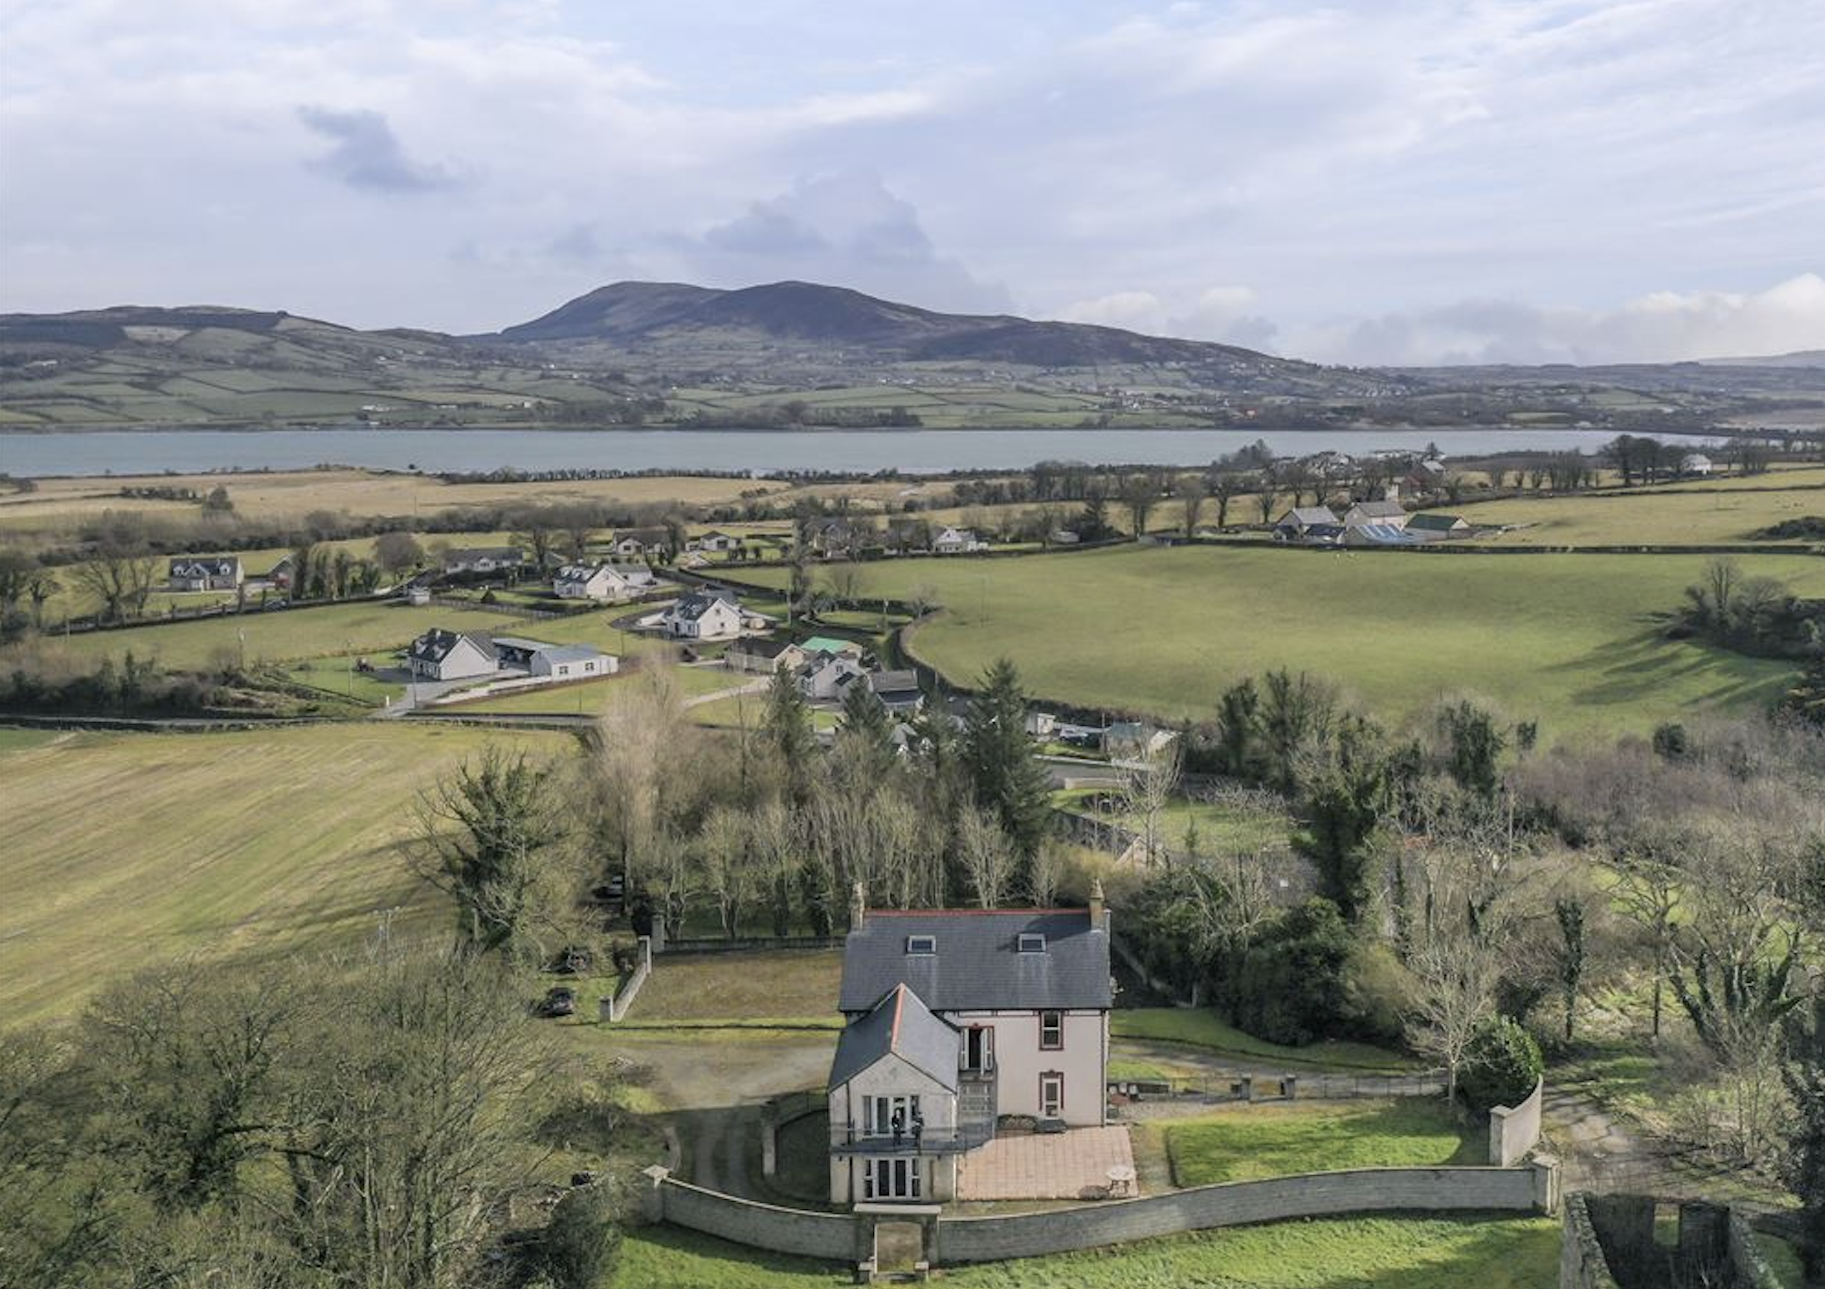 Here’s what €500k gets you in Donegal – a wine cellar, tennis court and 3 acre estate